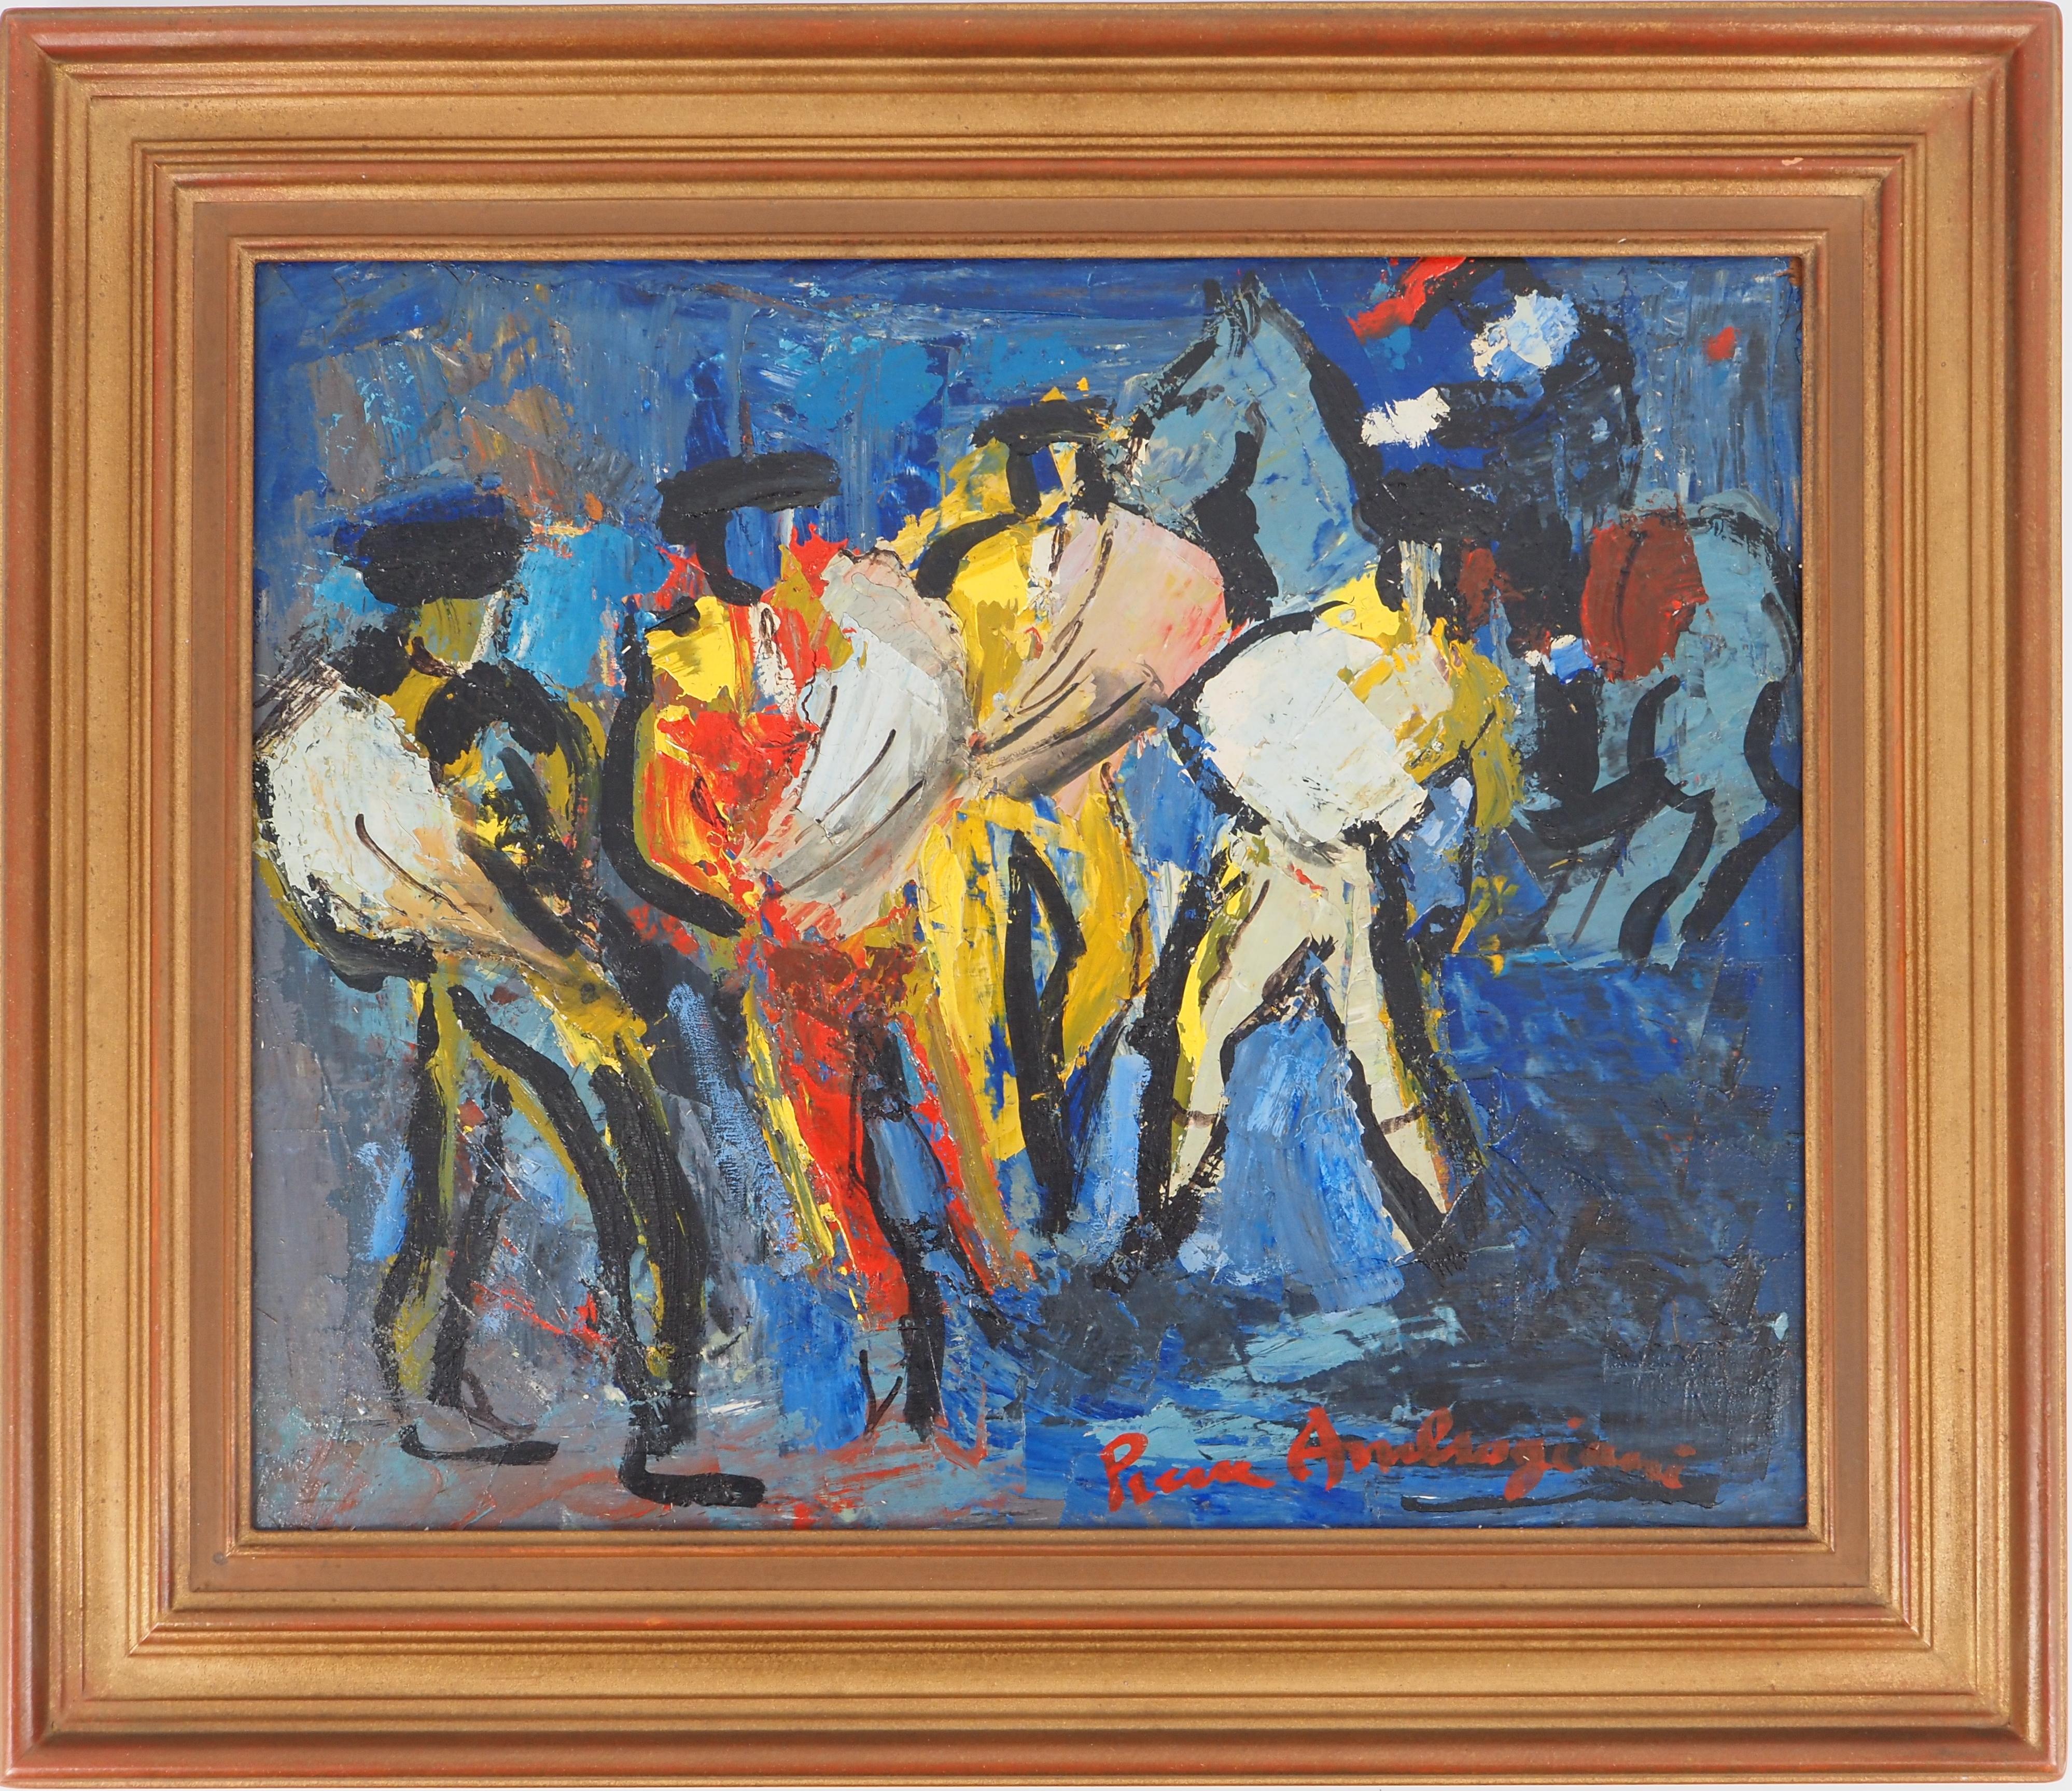 Pierre Ambrogiani Figurative Painting - Colorful Torero - Original Oil on Canvas, Signed and Framed